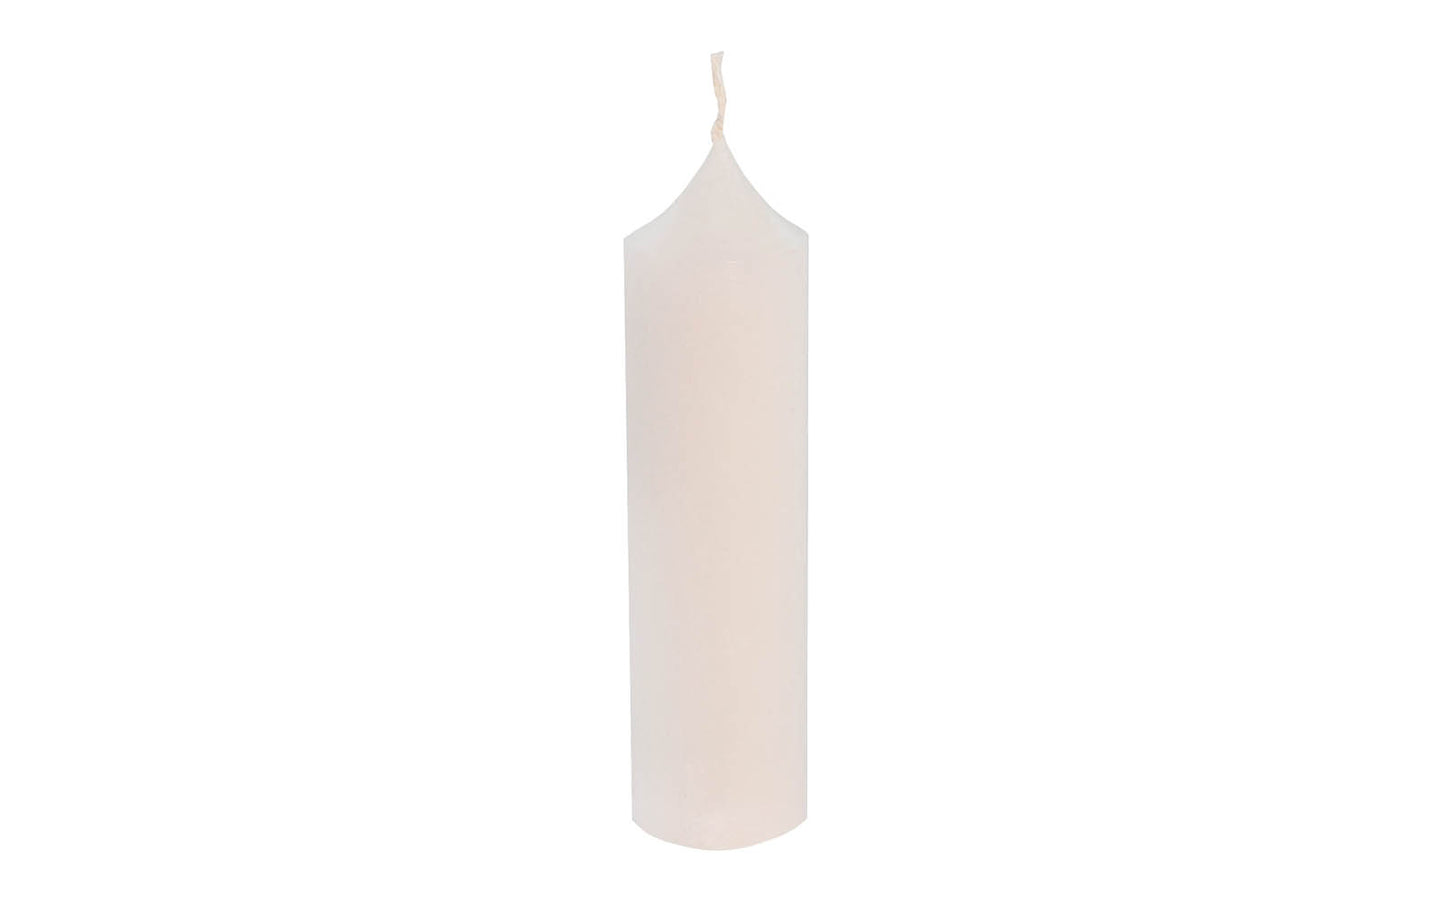 Candle-lite white plumbers candle for patios, hurricane lamps, & more. They will burn for approximately 8 to 10 hours. White color candle. Dimensions: 1-1/4" x 5". Pillar type candle. Fragrance Free. Do it Best No. 64693. 076001803278